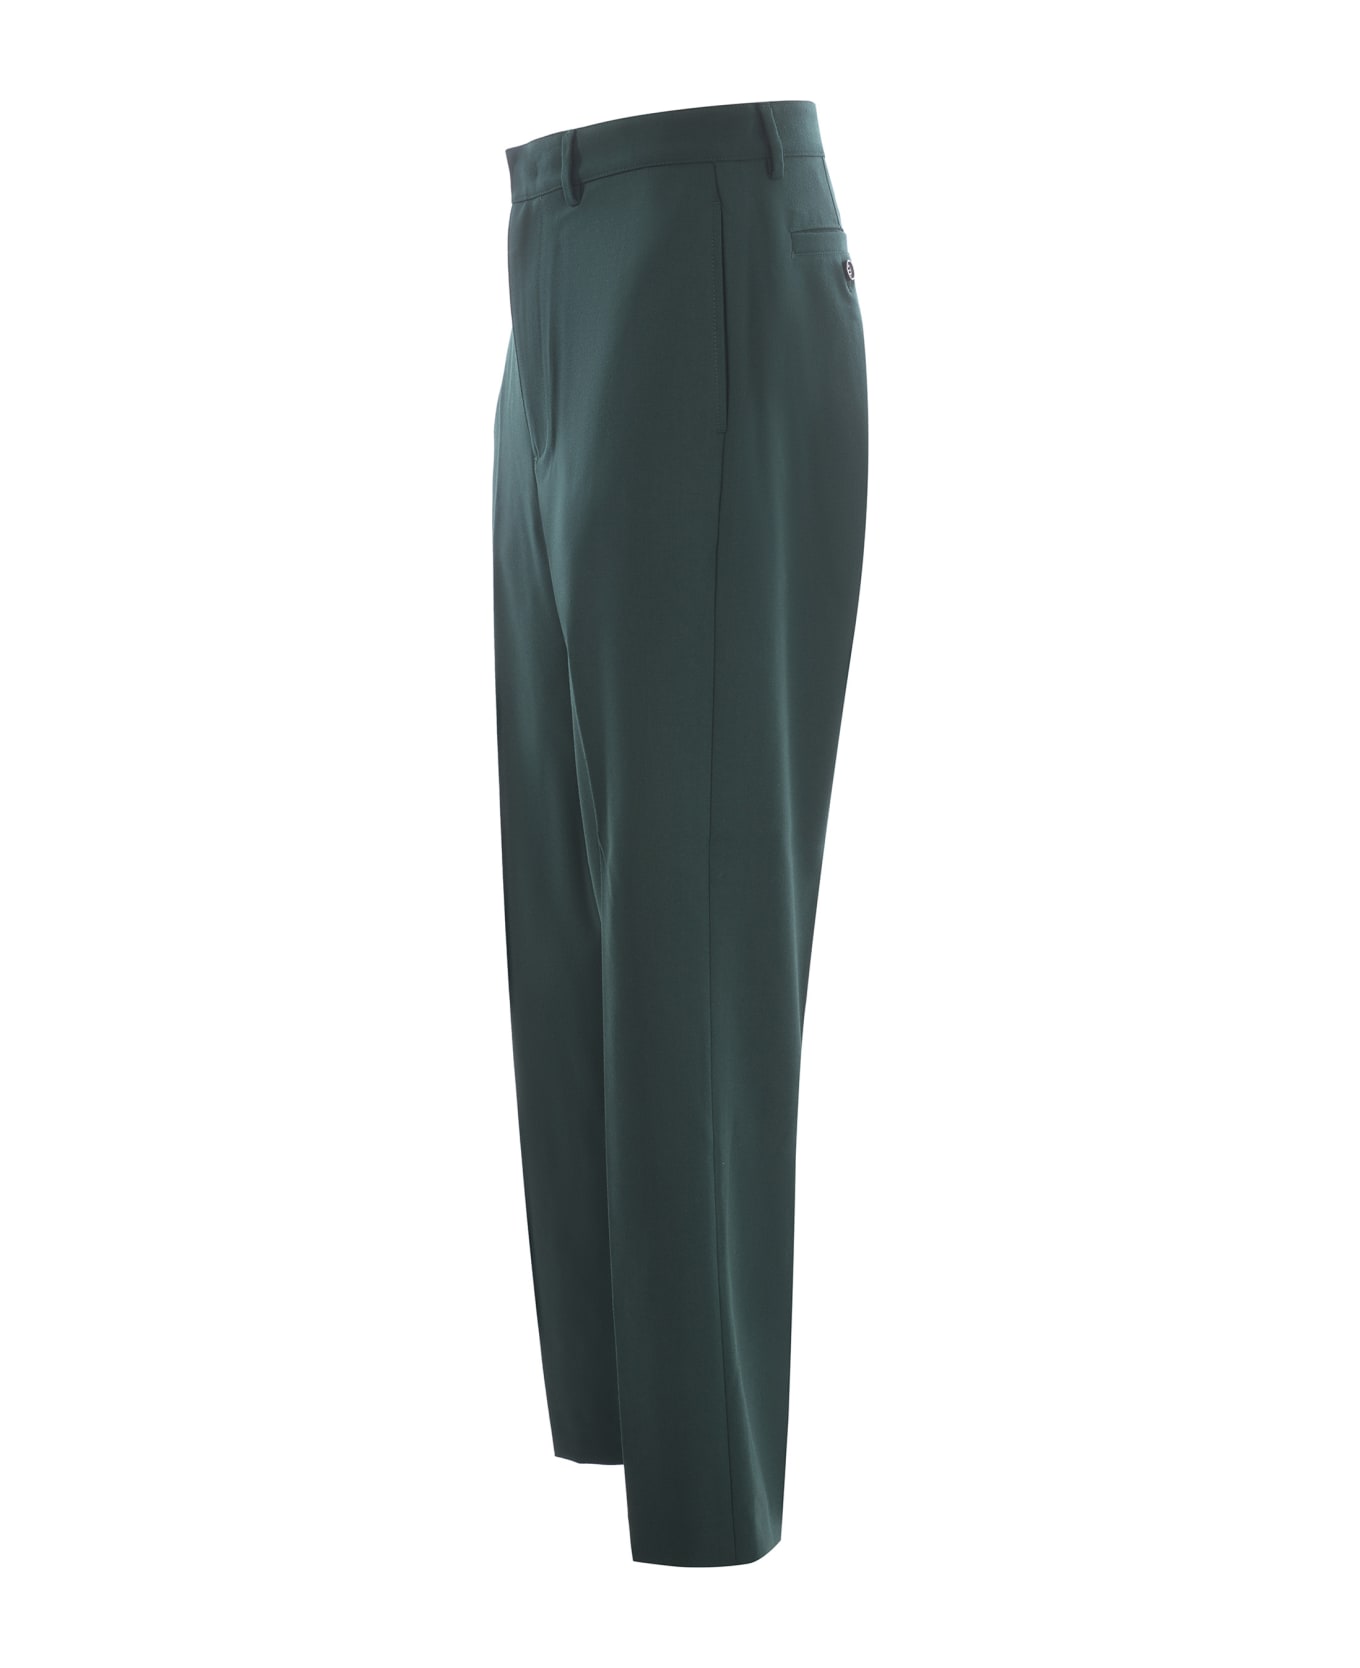 Department Five Trousers Department Five In Wool Blend - Verde scuro